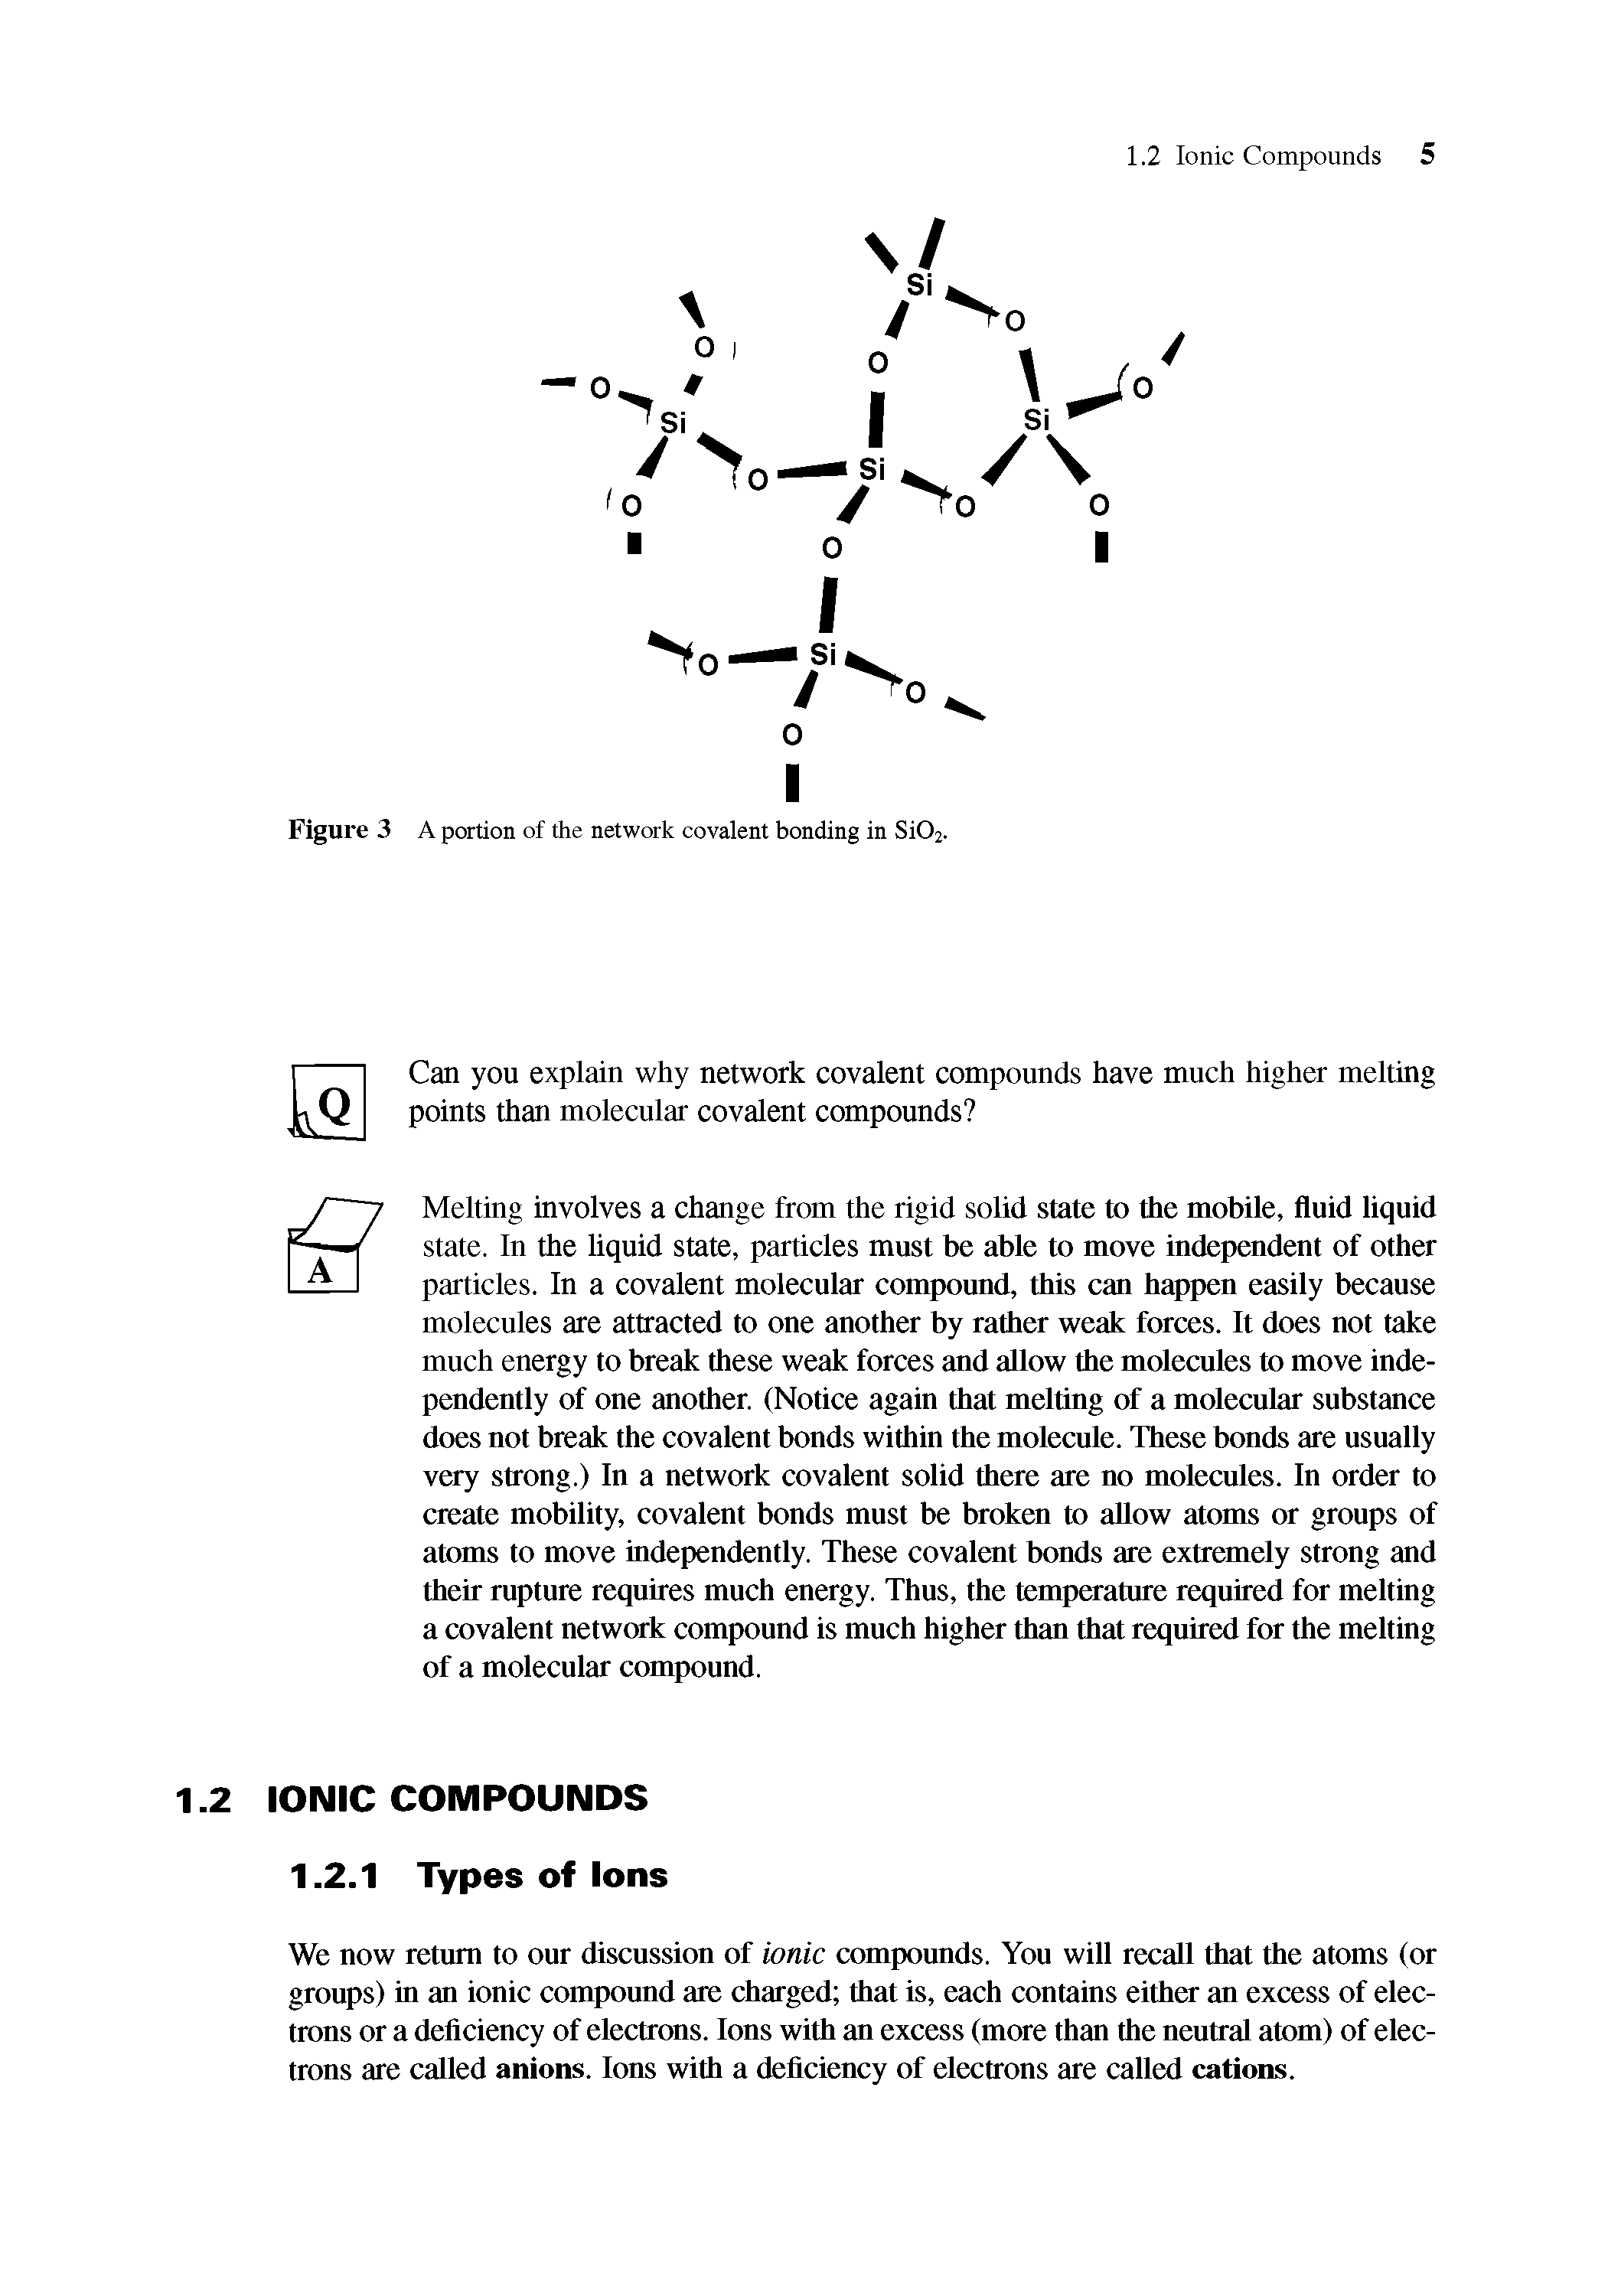 Figure 3 A portion of the network covalent bonding in Si02-...